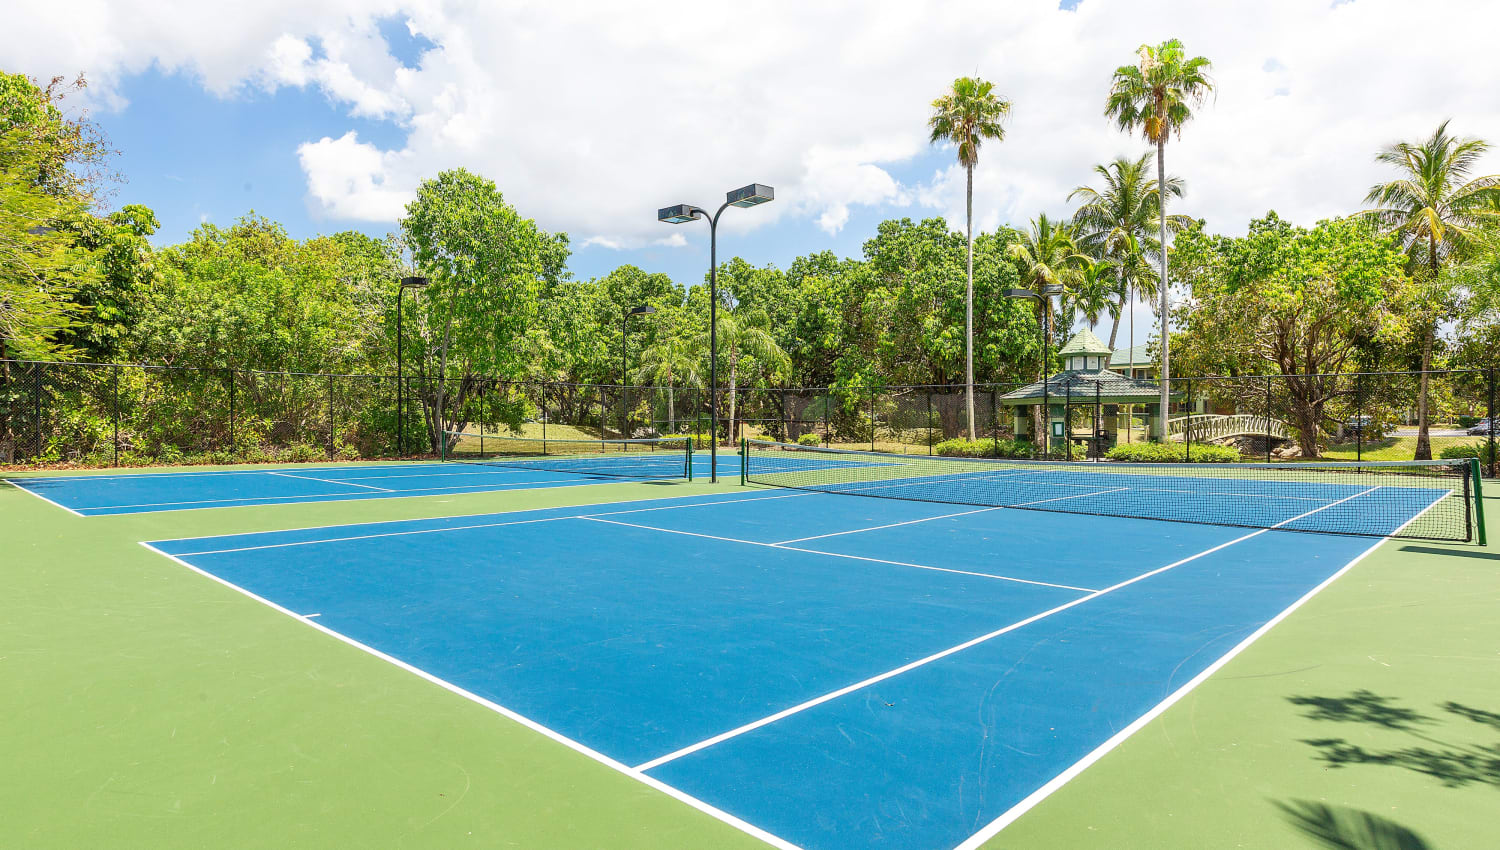 Tennis courts at Club Mira Lago Apartments in Coral Springs, Florida